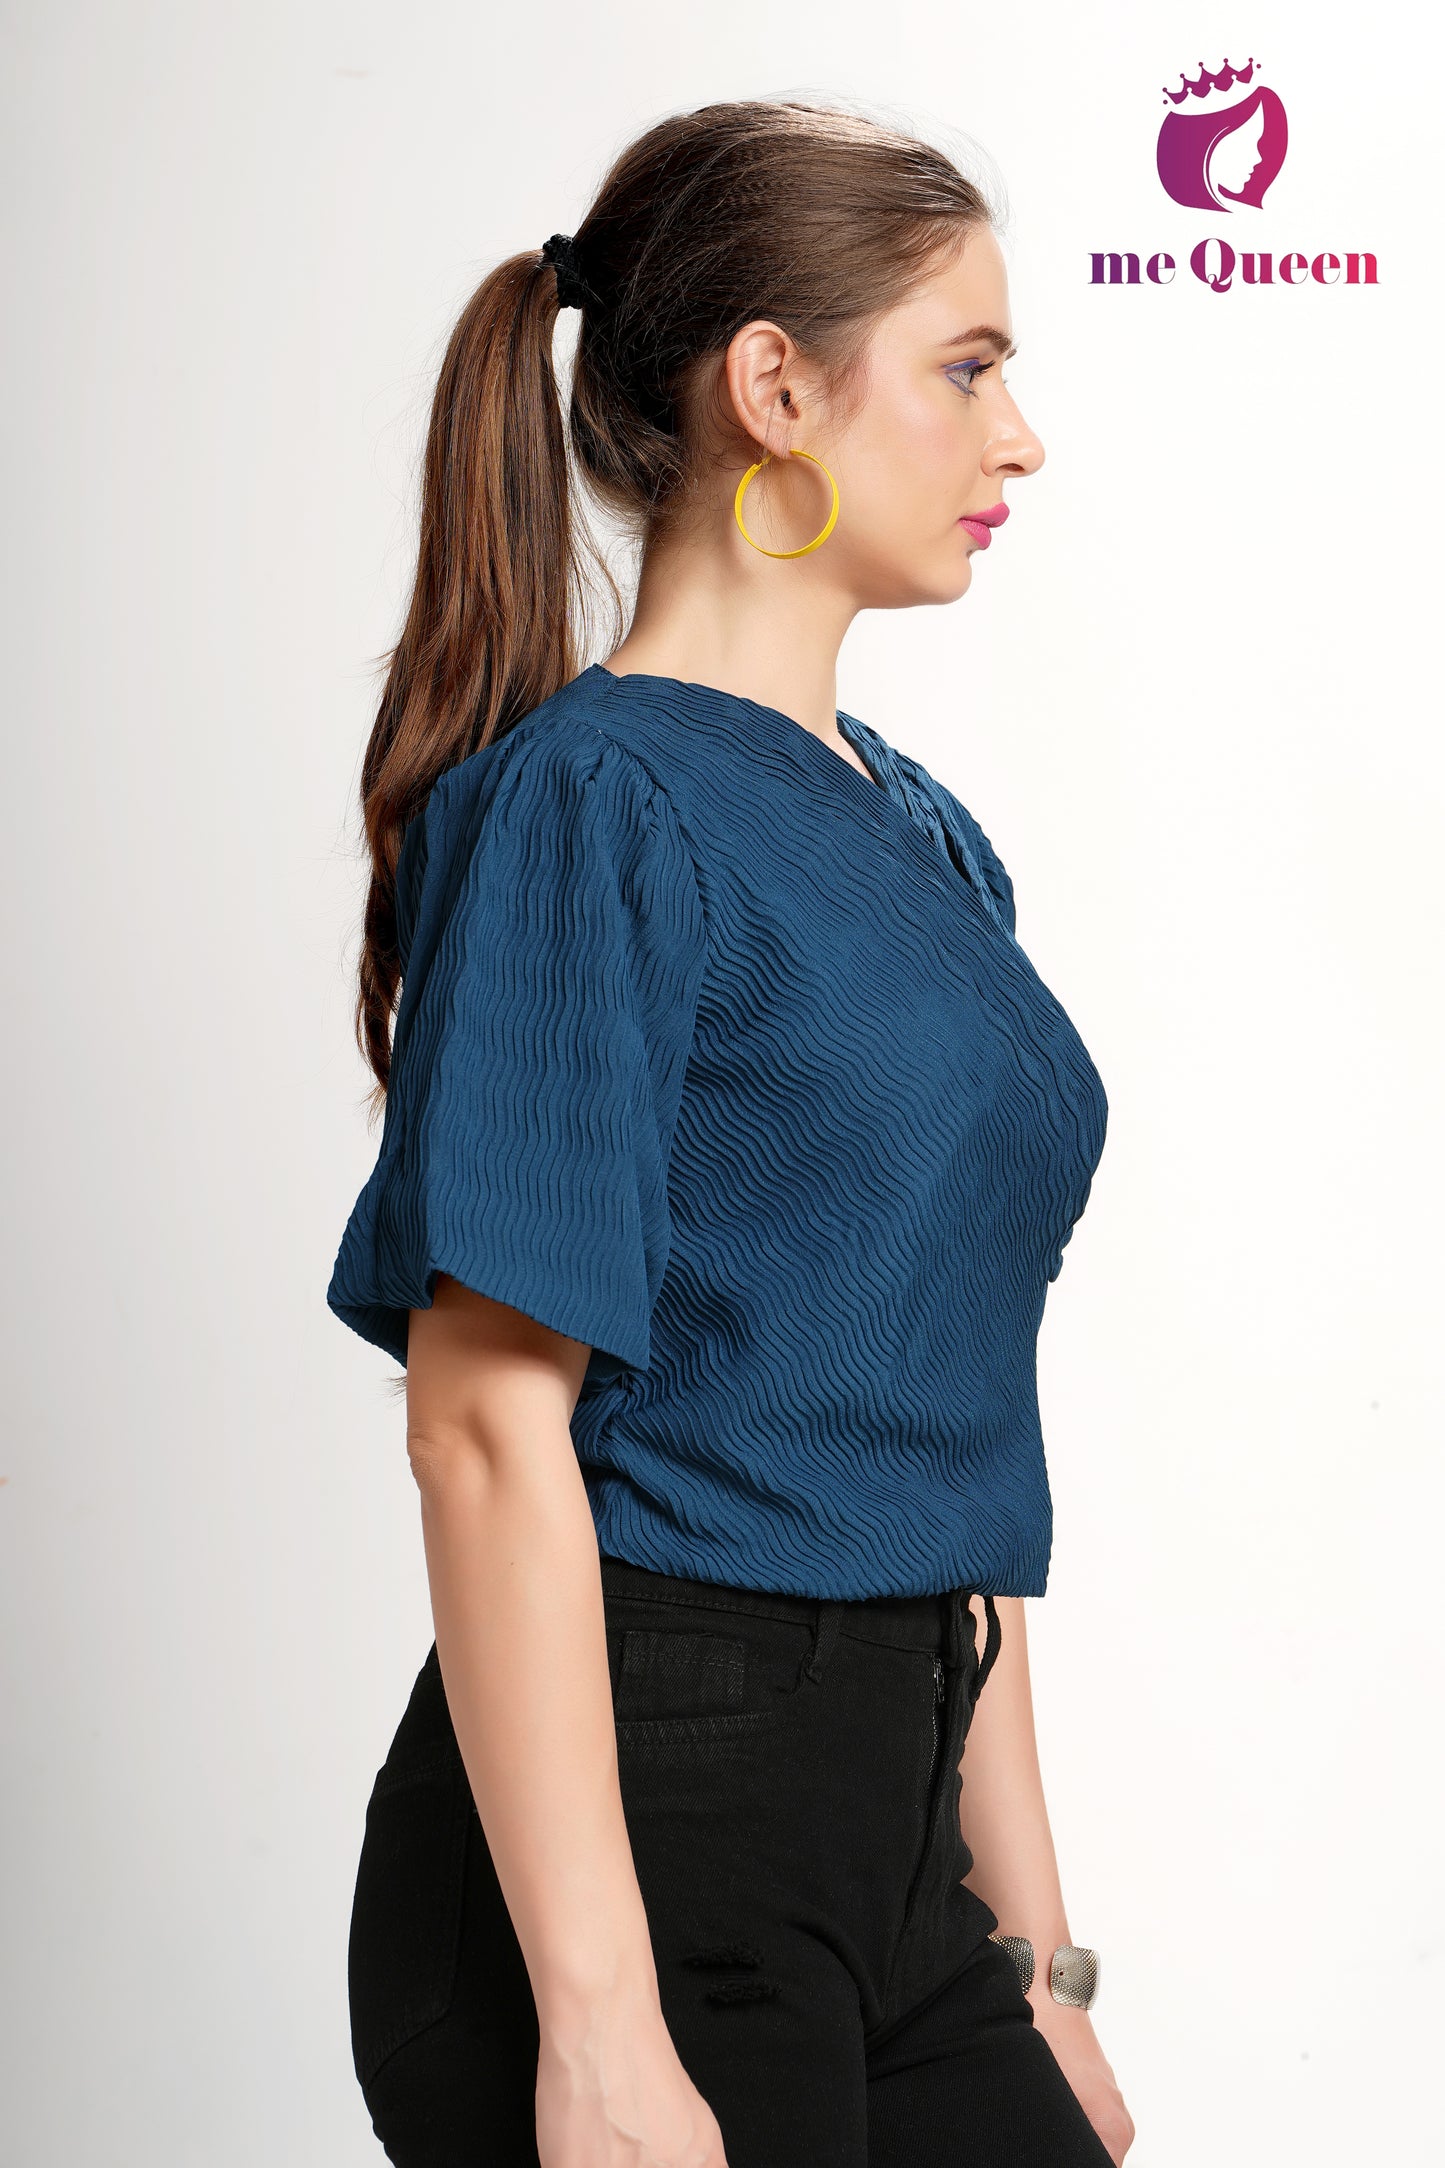 MeQueen's Women's Stylish Pattern Dark Blue Top with Puff Sleeves